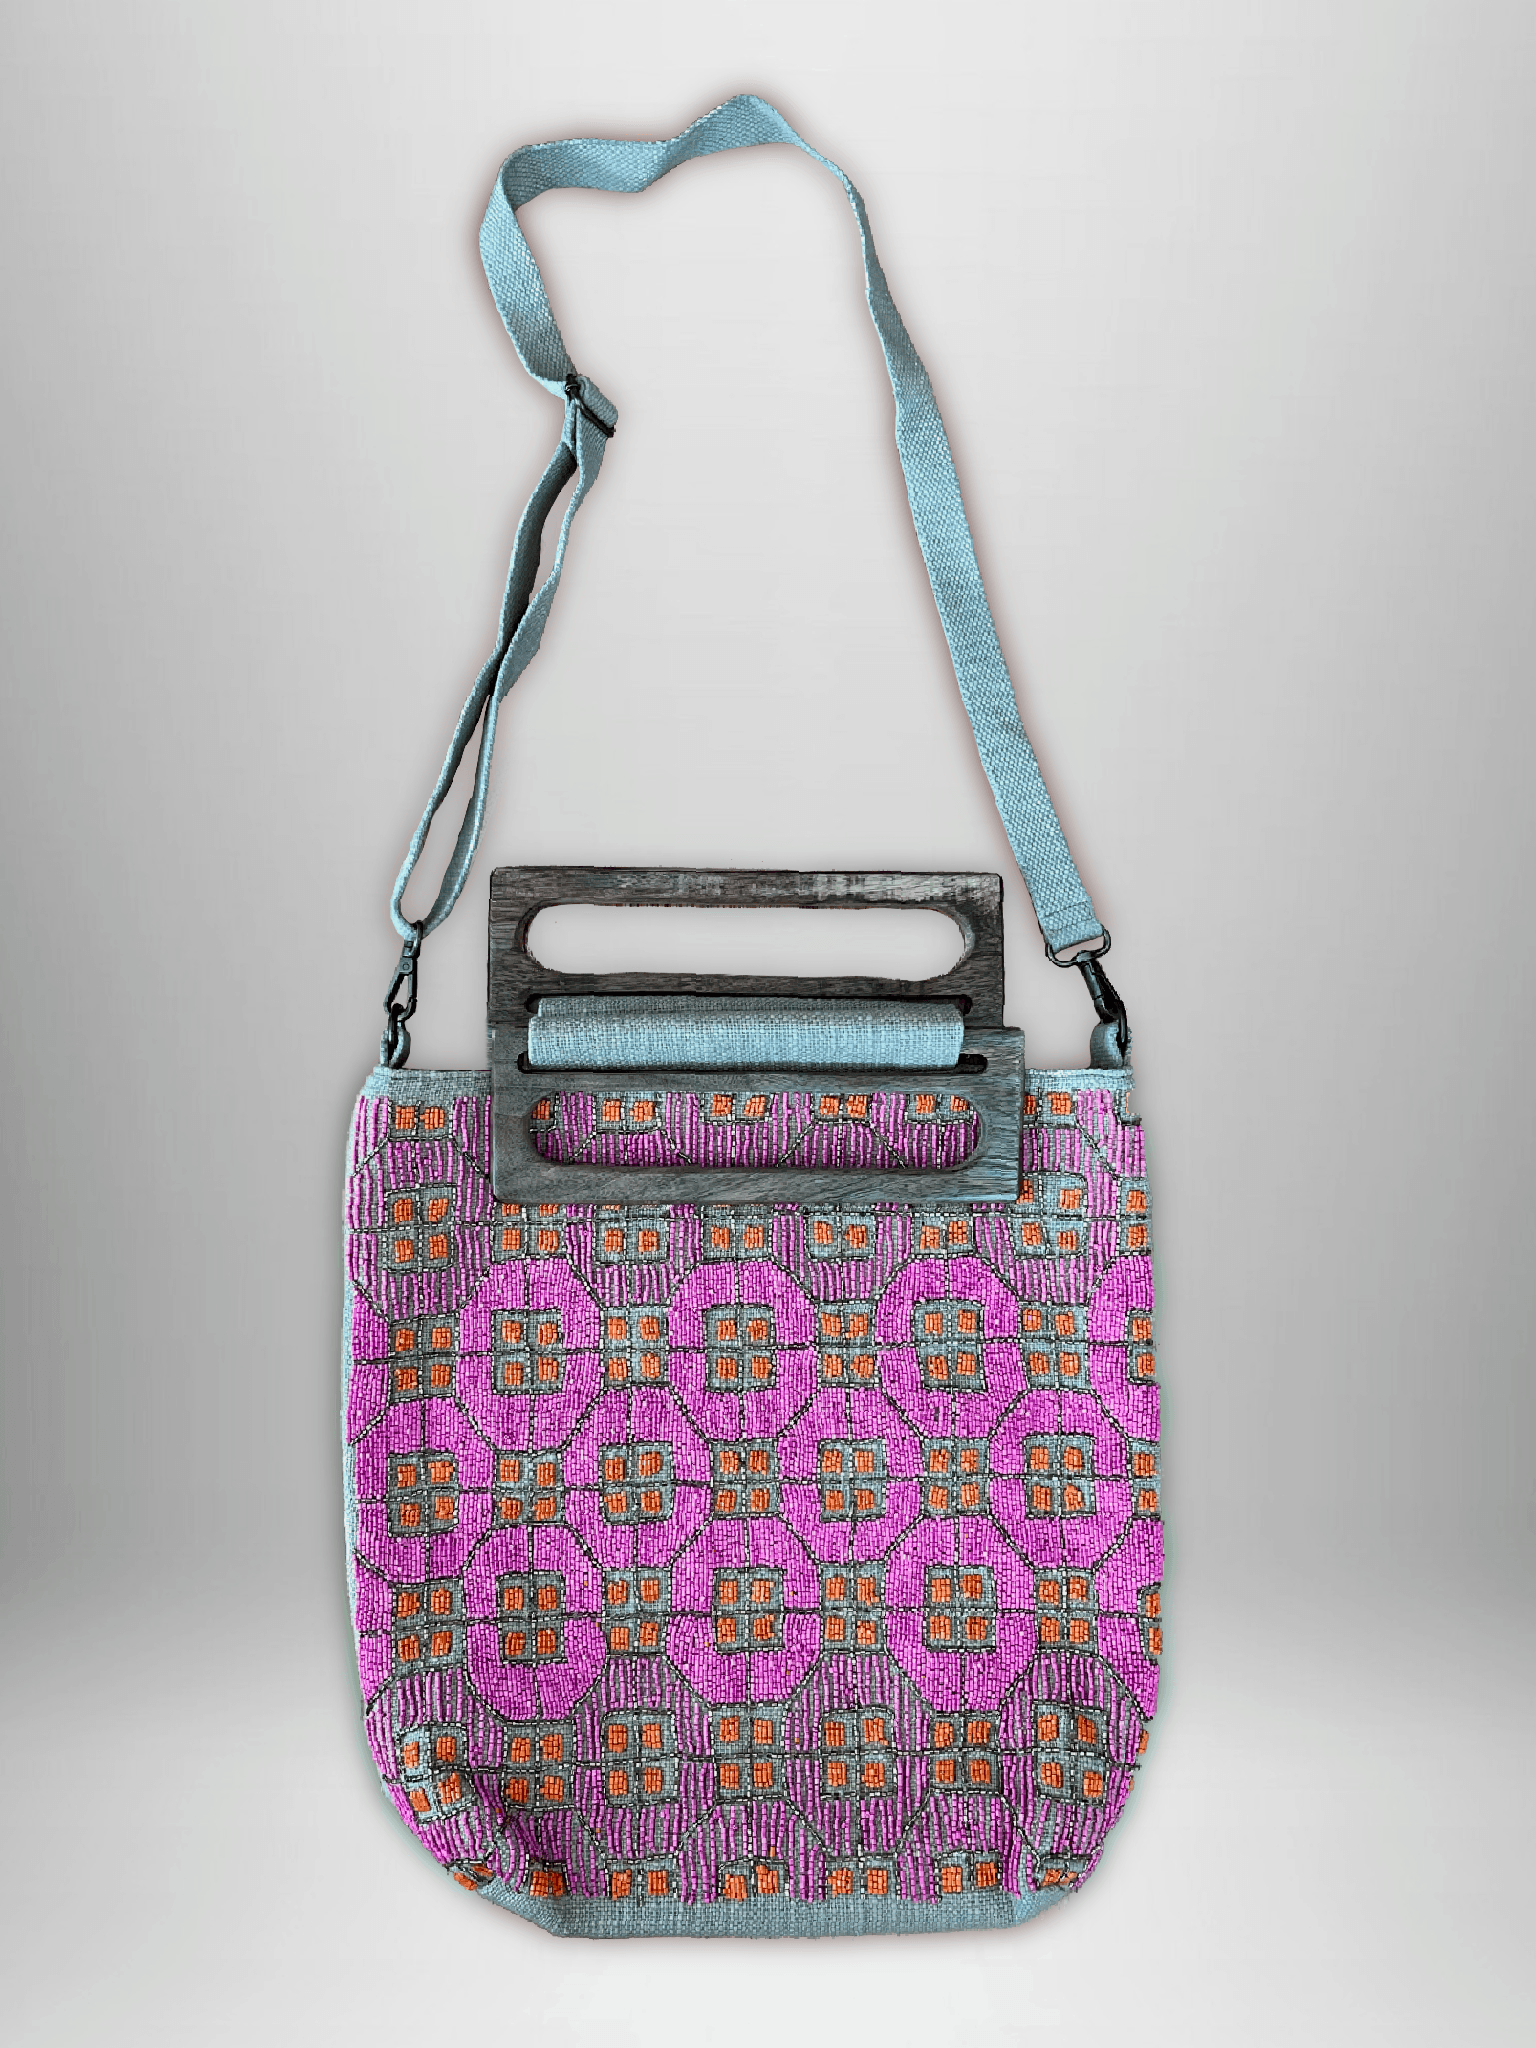 Never Ever Ever Land Tote - Hippie Hued